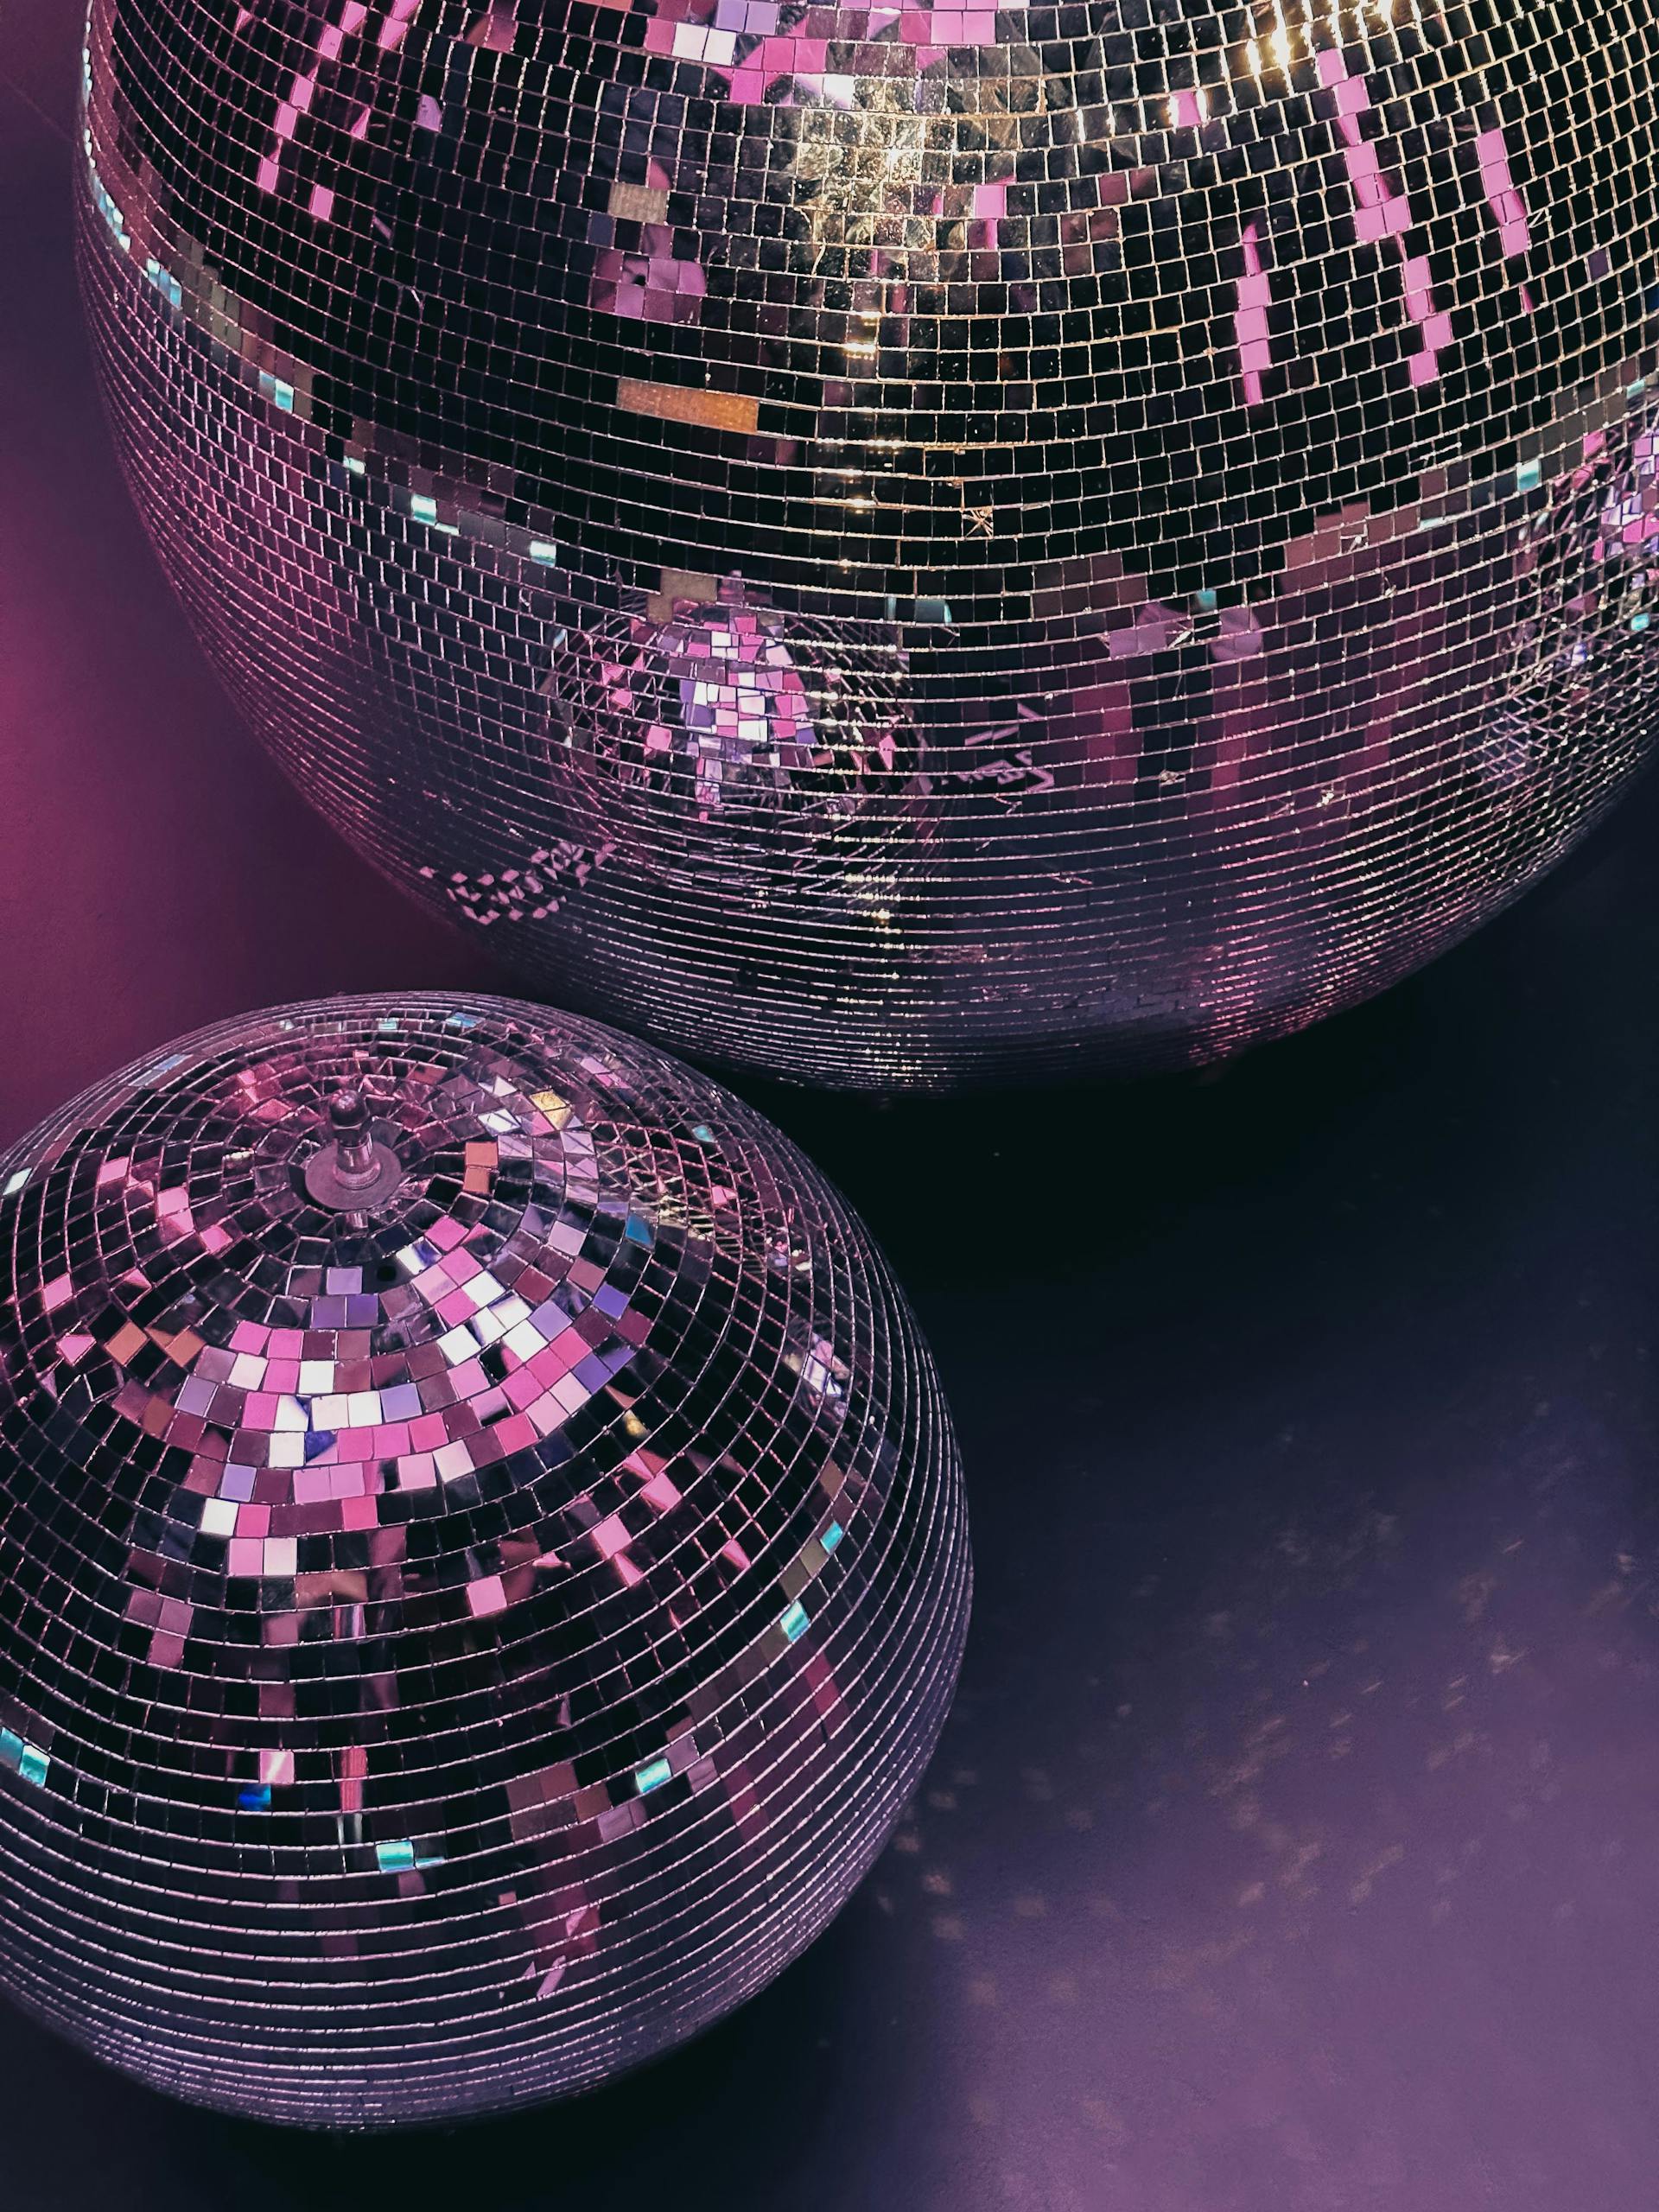 A close-up of disco balls in purple lighting | Source: Pexels